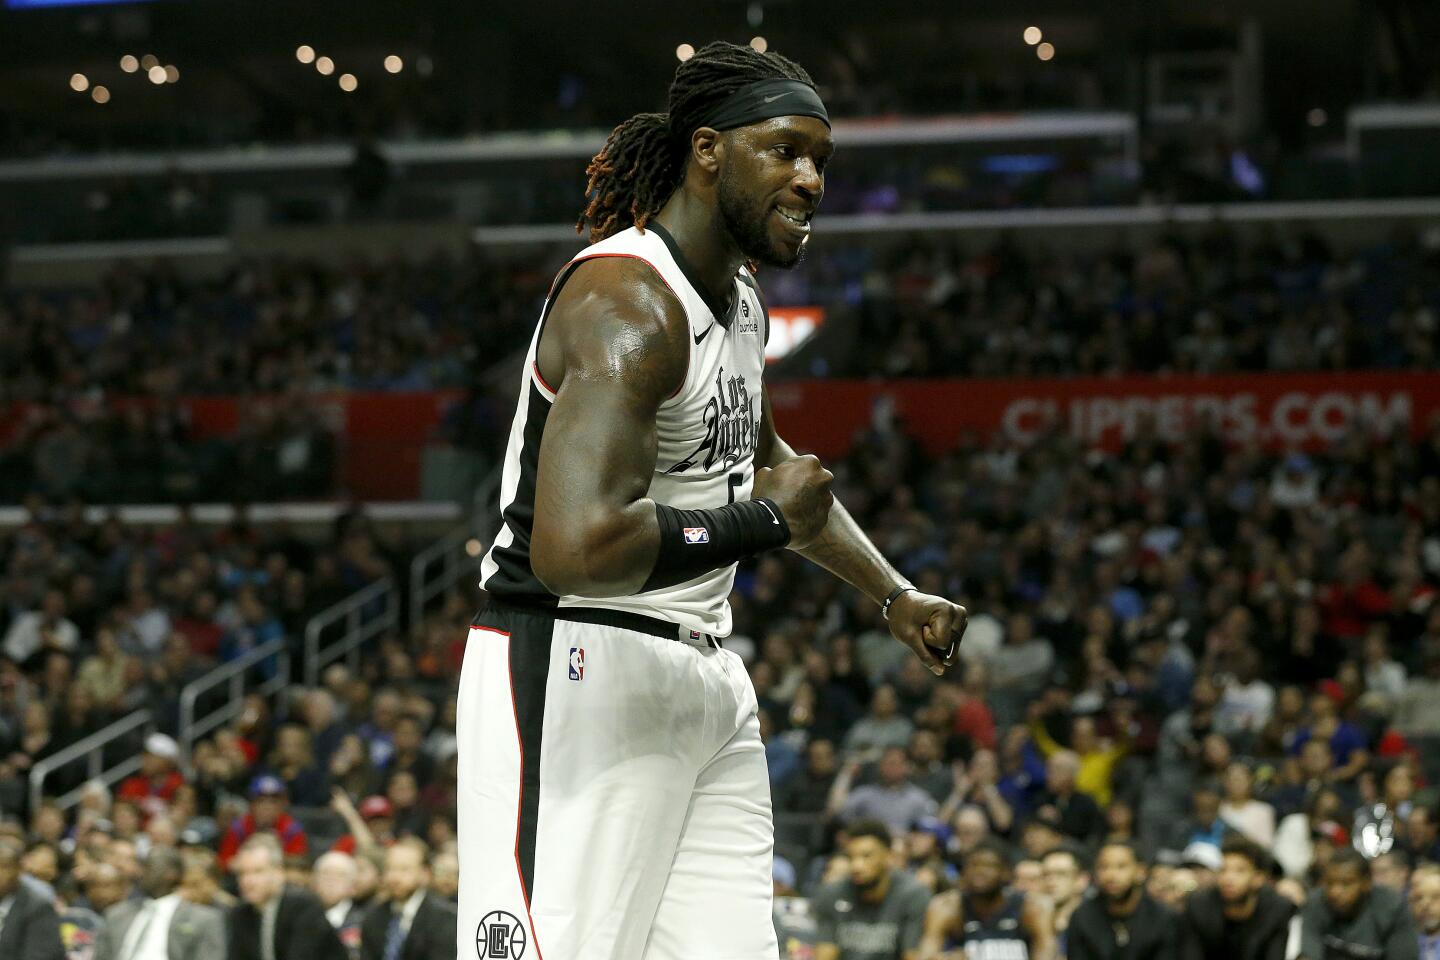 Clippers forward Montrezl Harrell celebrates after getting a basket against the Magic during the second half of a game Jan. 16 at Staples Center.